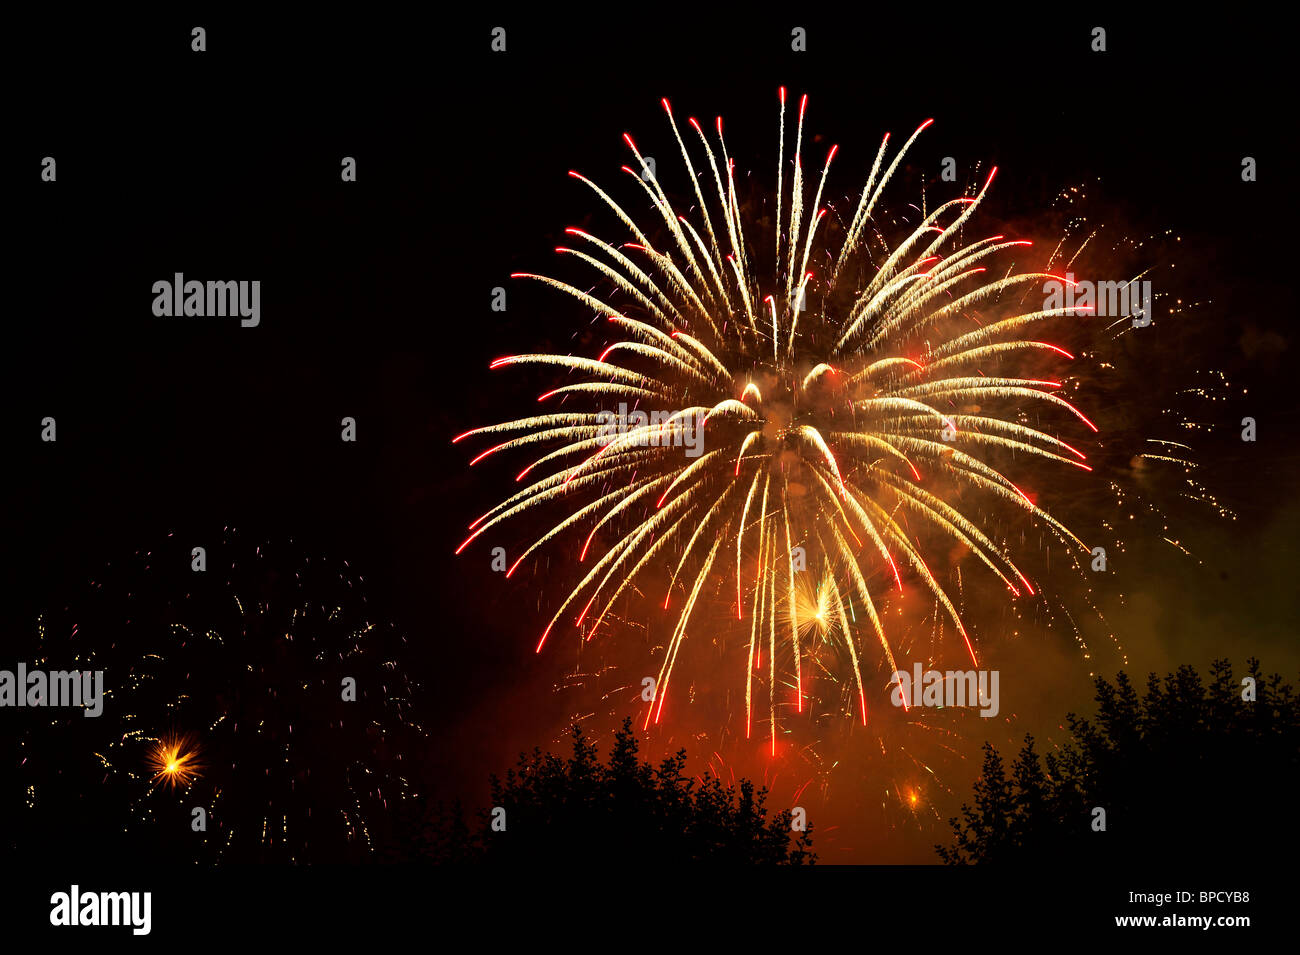 Firework bursts in the night sky, over trees (just visible). Space for text in the dark of the night sky. Stock Photo